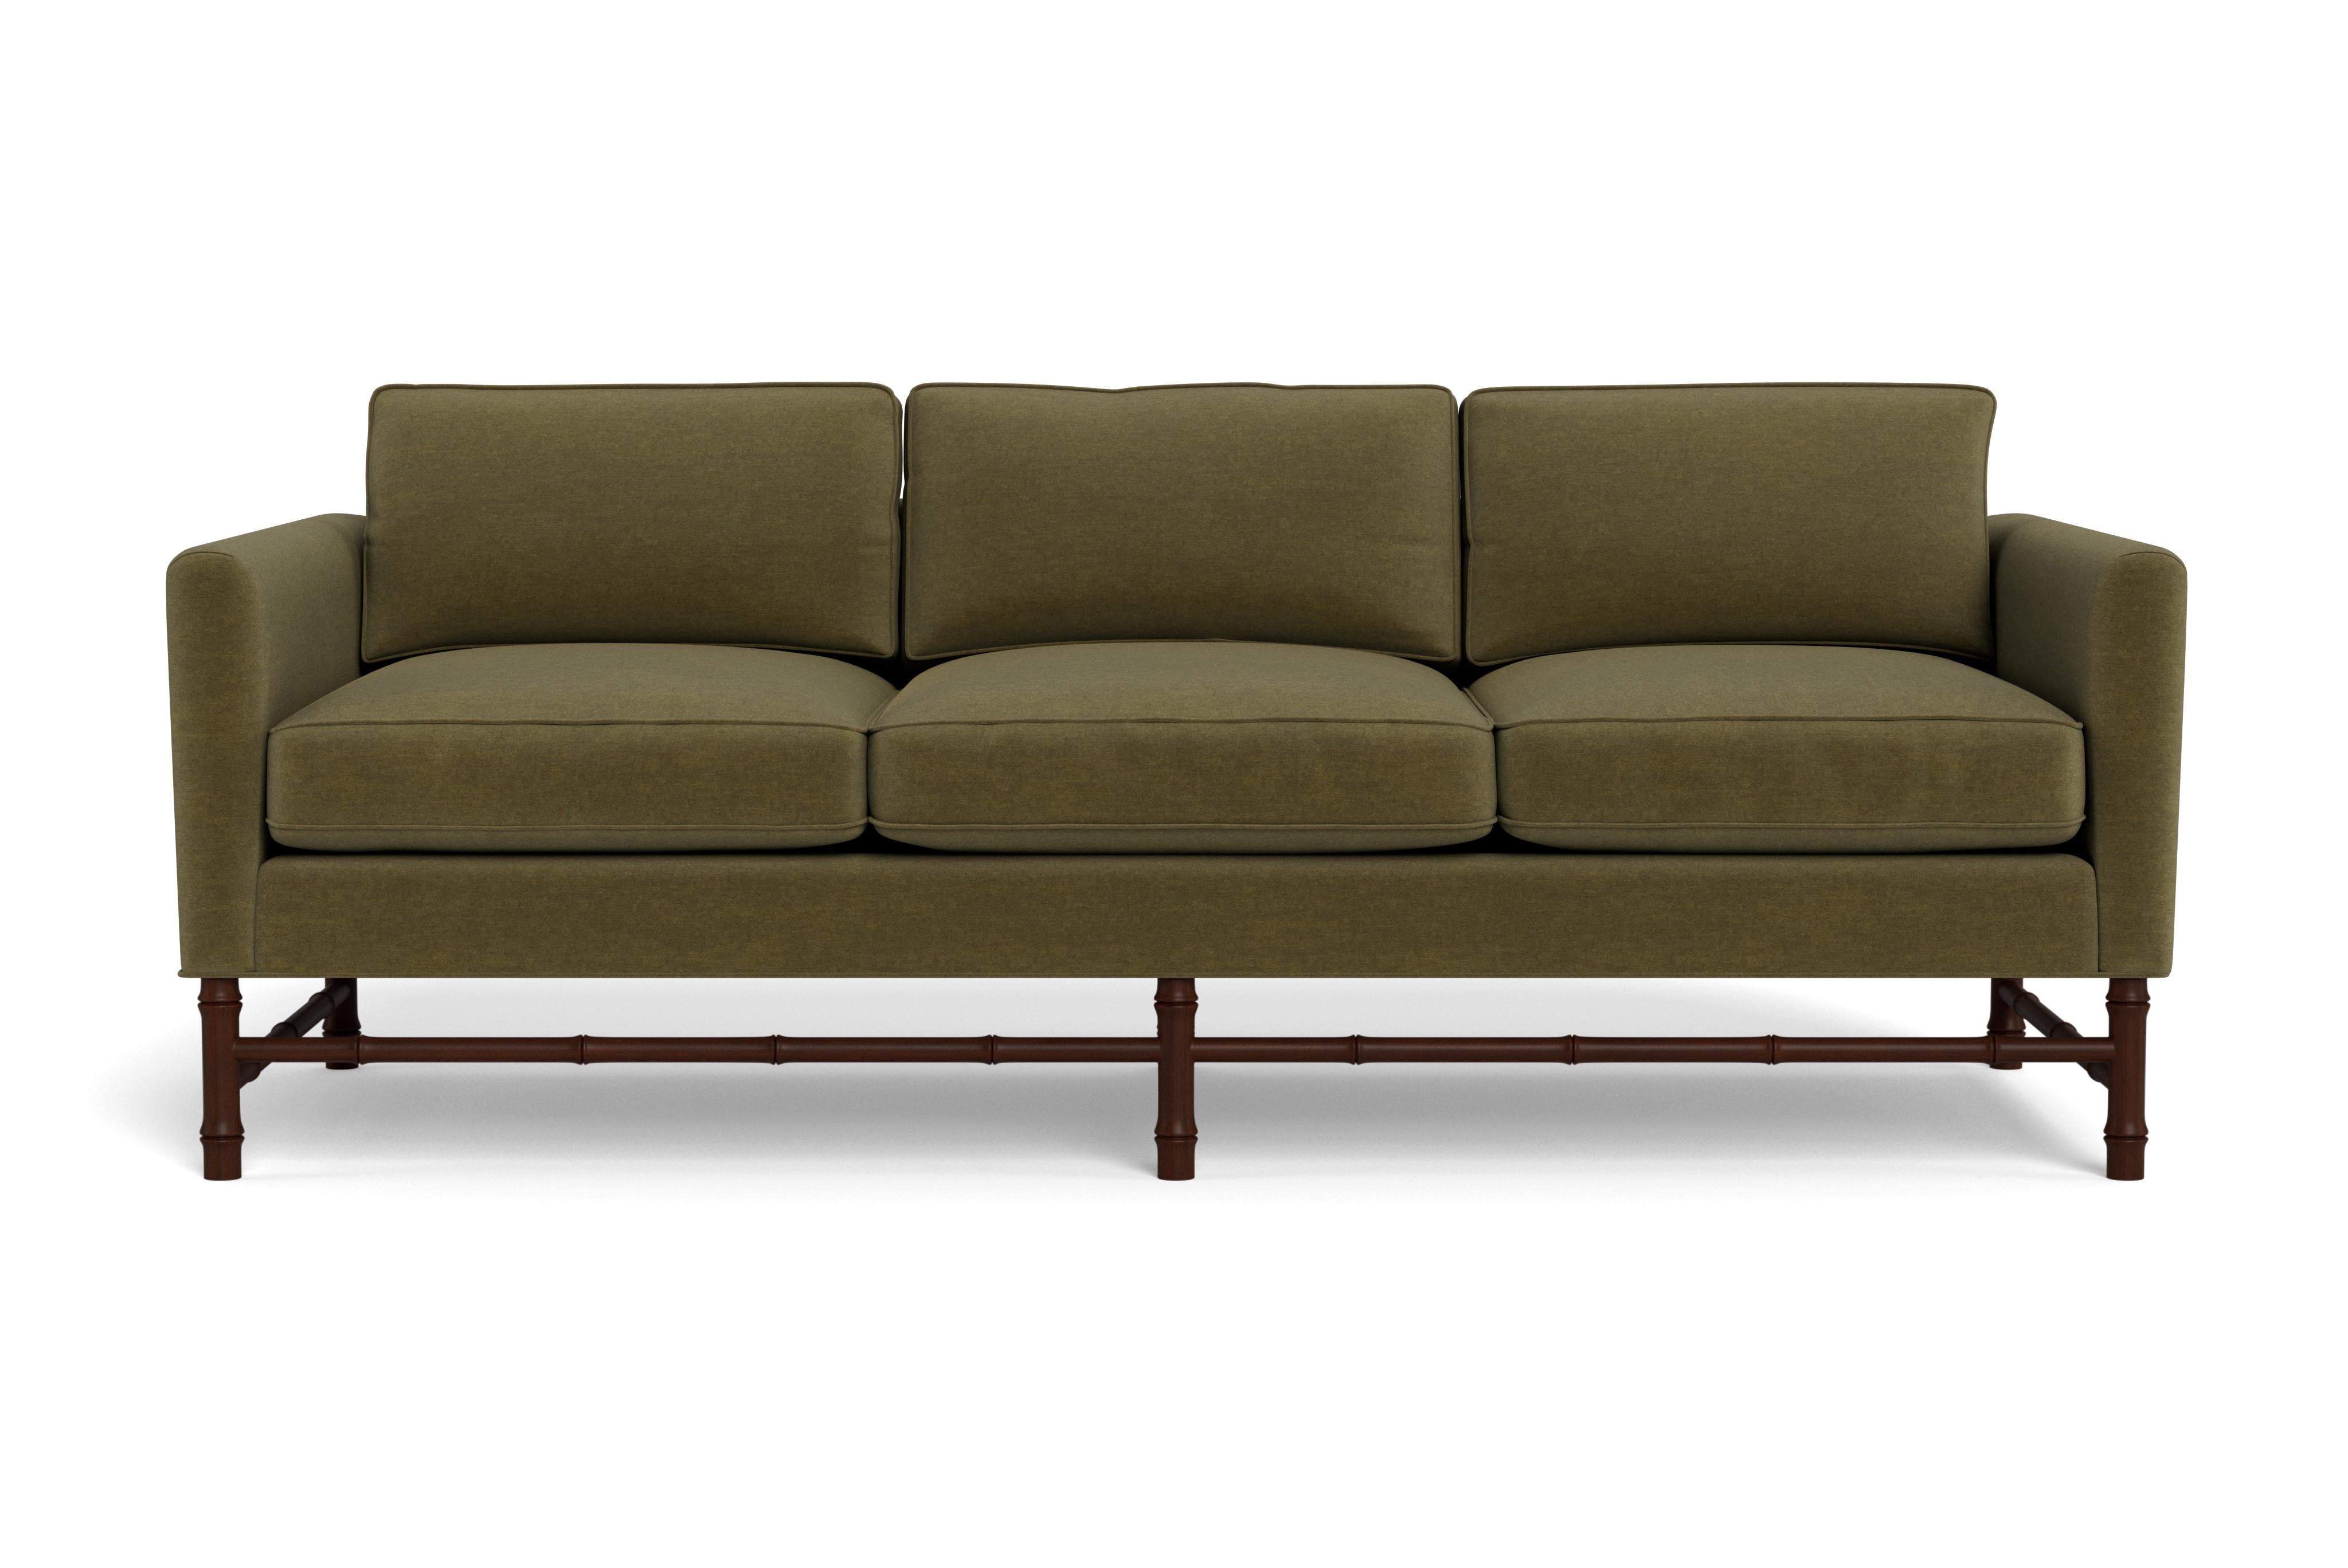 This comfortable sofa has classic, clean lines but the bamboo base gives it personality. Perfect for any style interior.  Made to order with a mahogany-stained base with our moss performance velvet, a fabric able to be cleaned and used in high